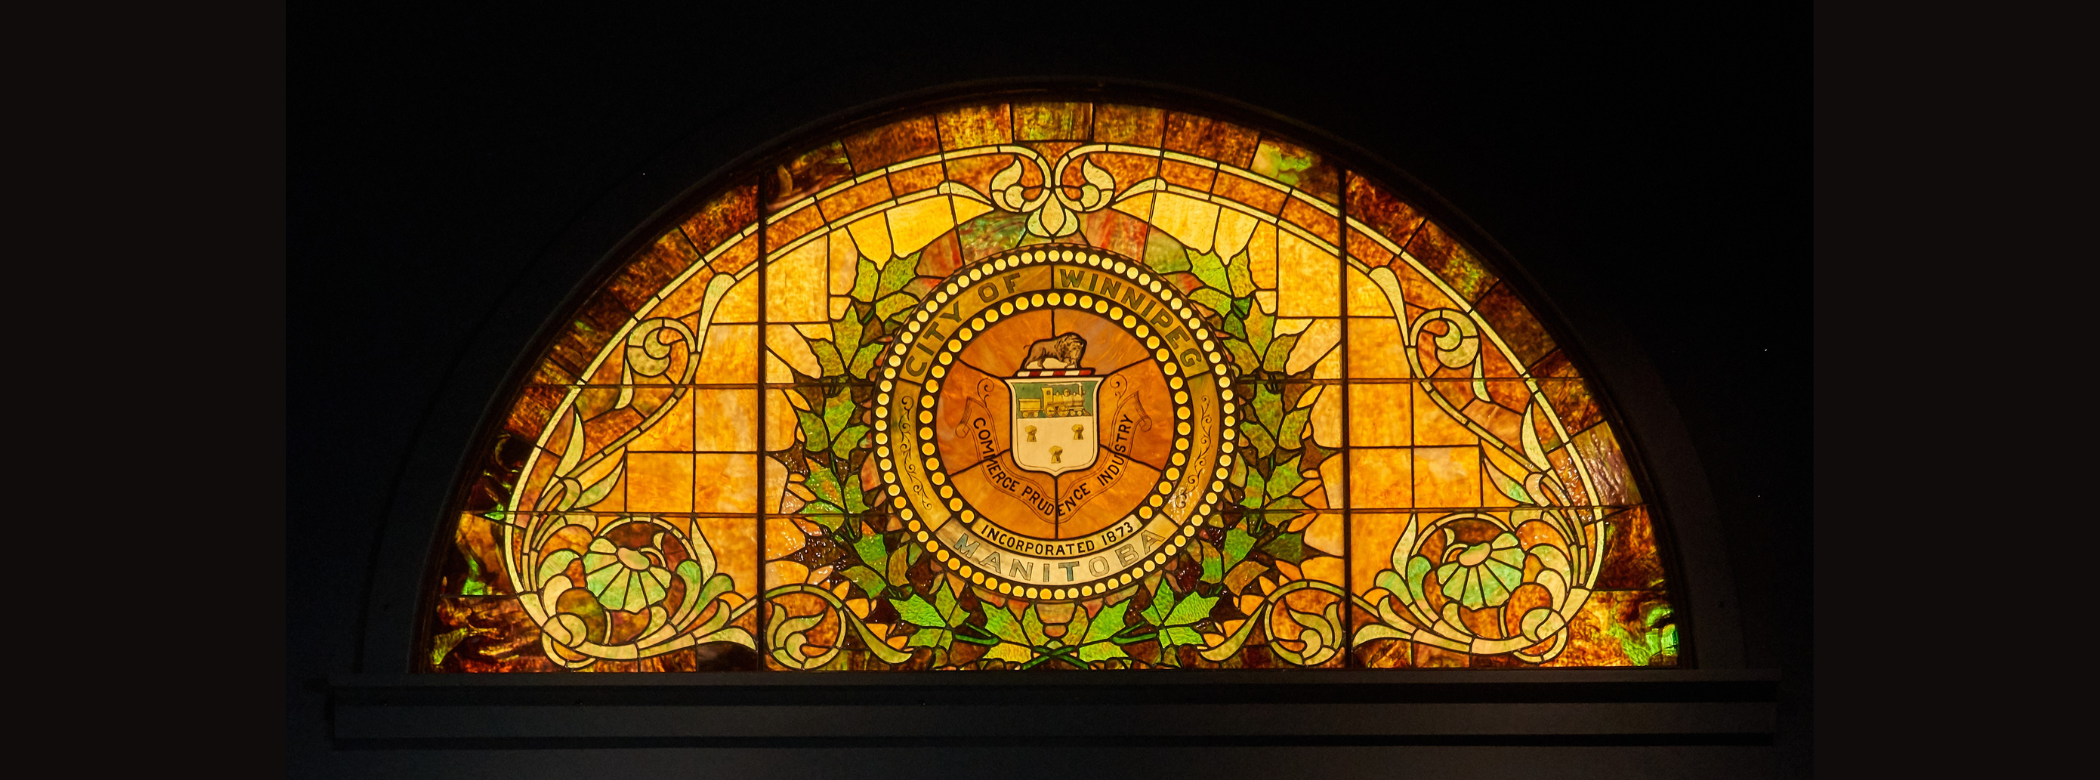 Large half-circle stained glass window installed on a dark wall, allowing the lit glass to stand out in contrast. The stained glass features a City of Winnipeg crest in the middle framed by a green wreath.